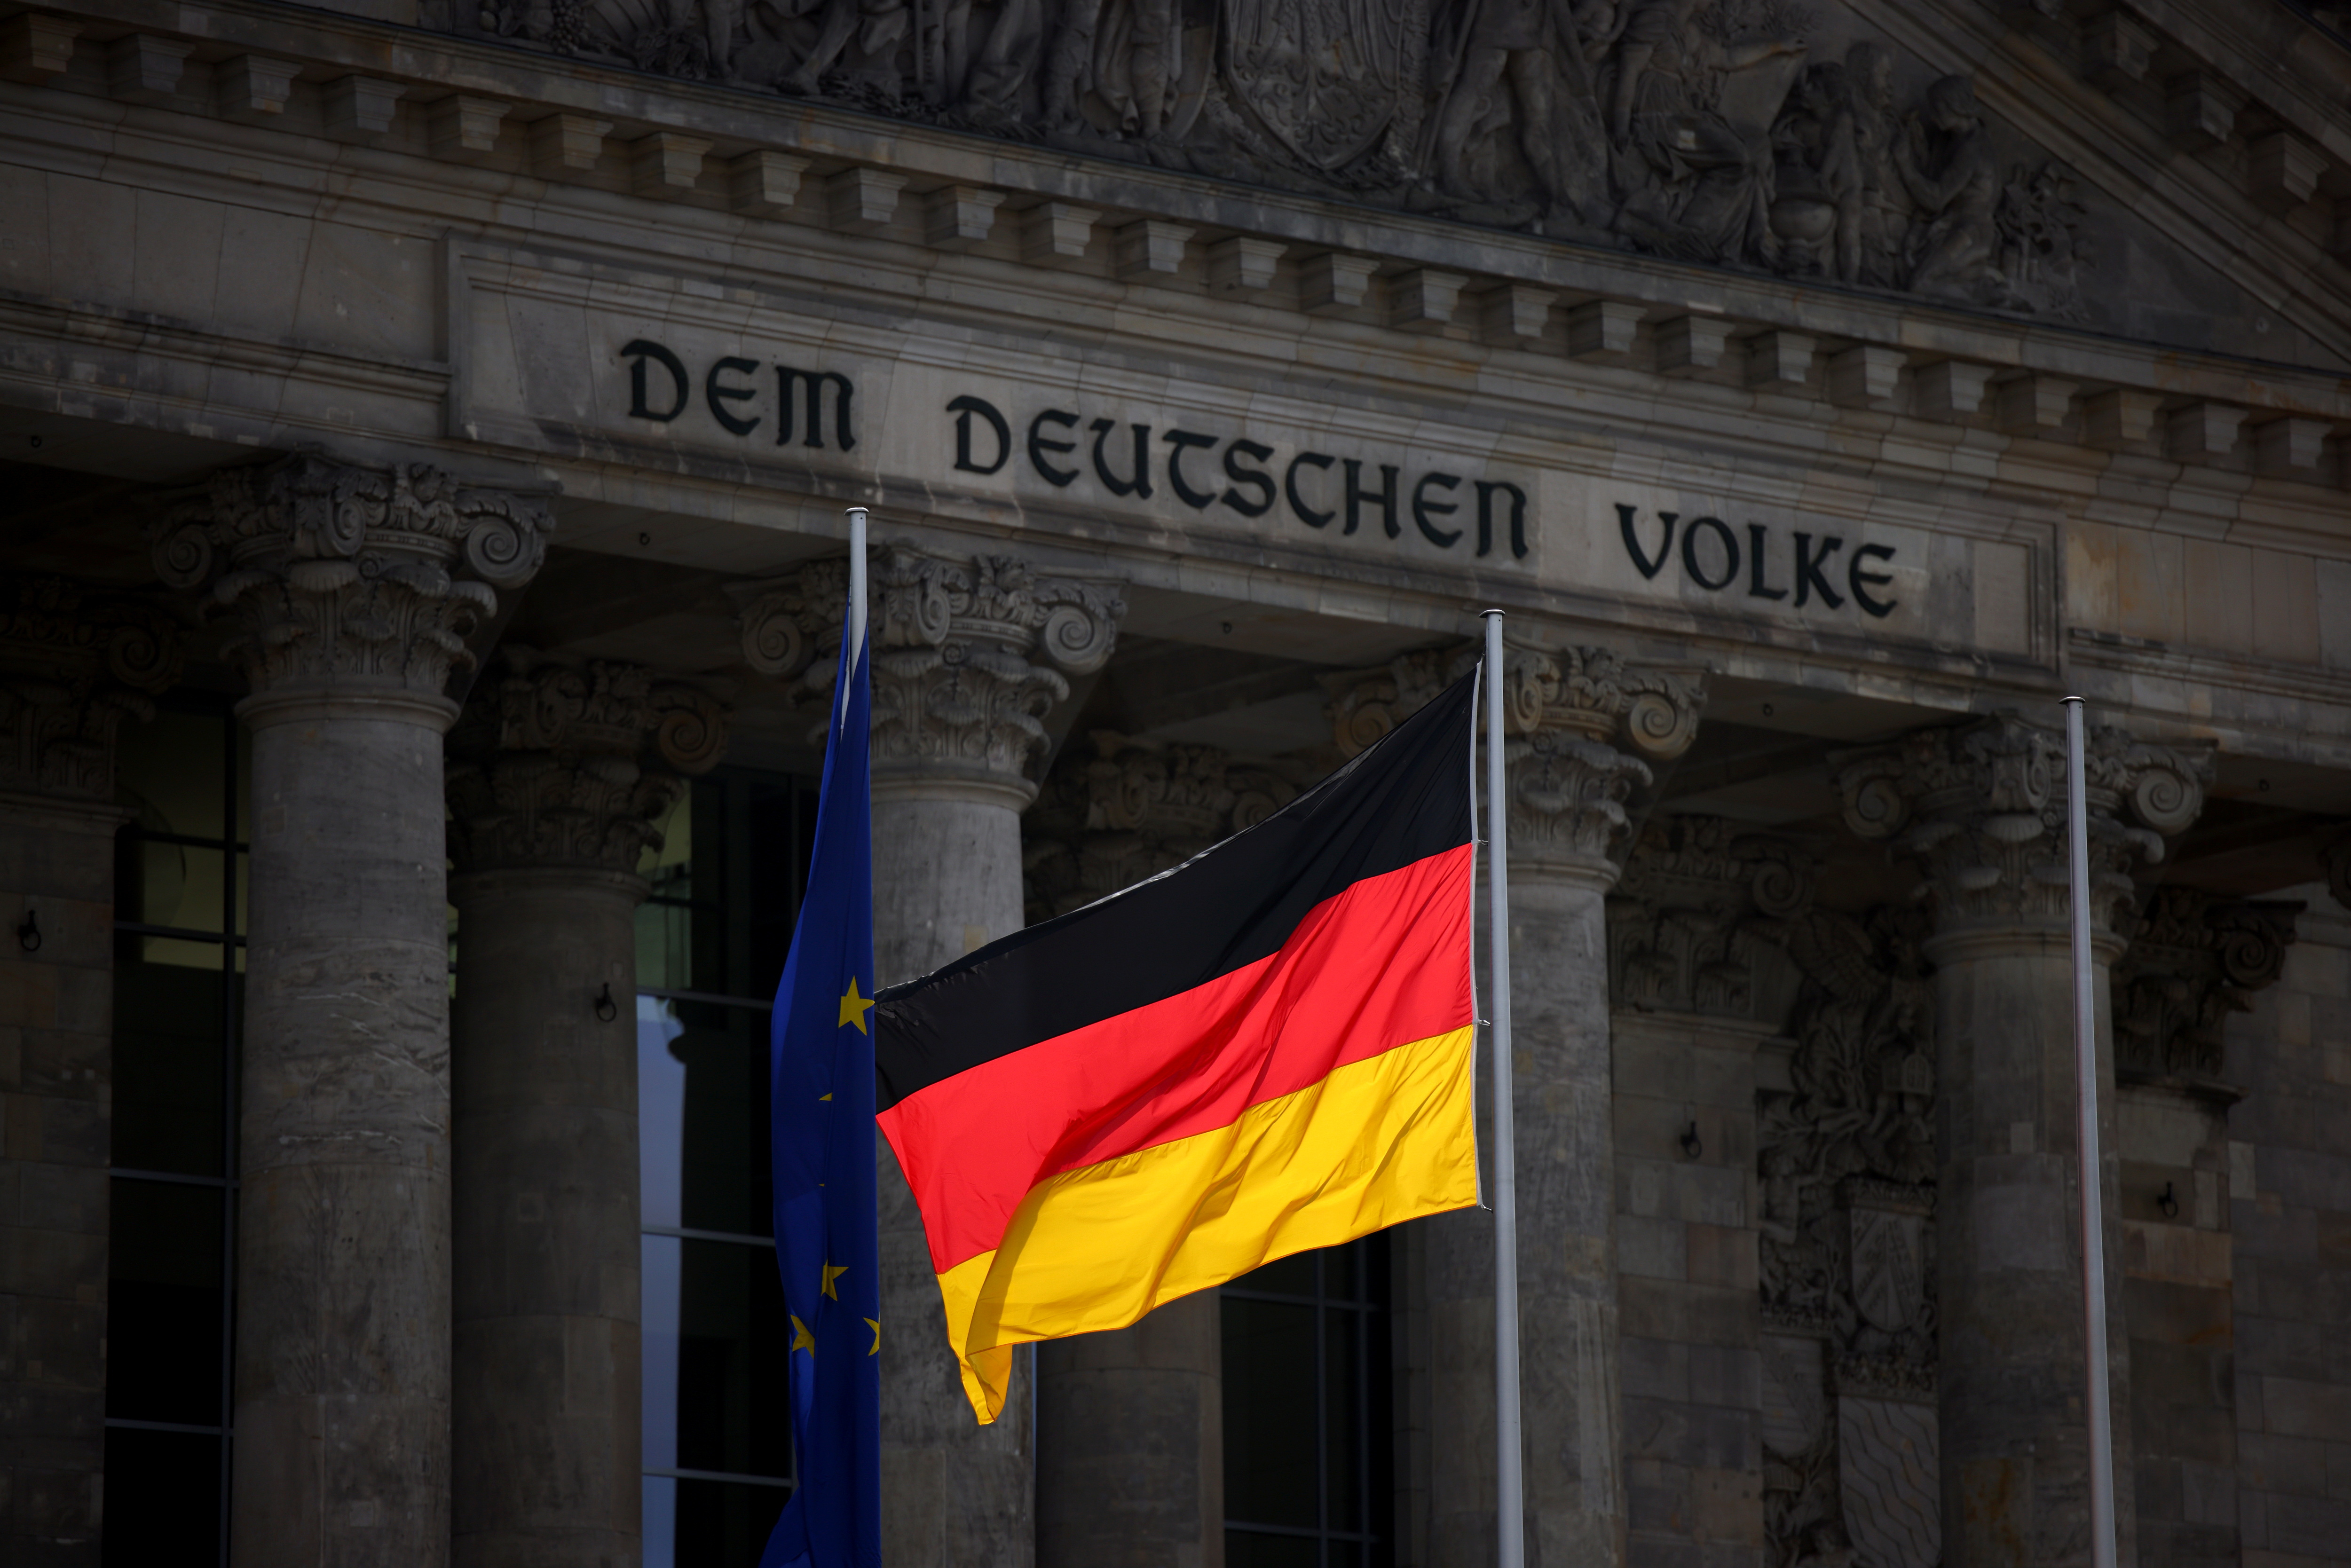 The German national flag flies in front of Reichstag building in Berlin